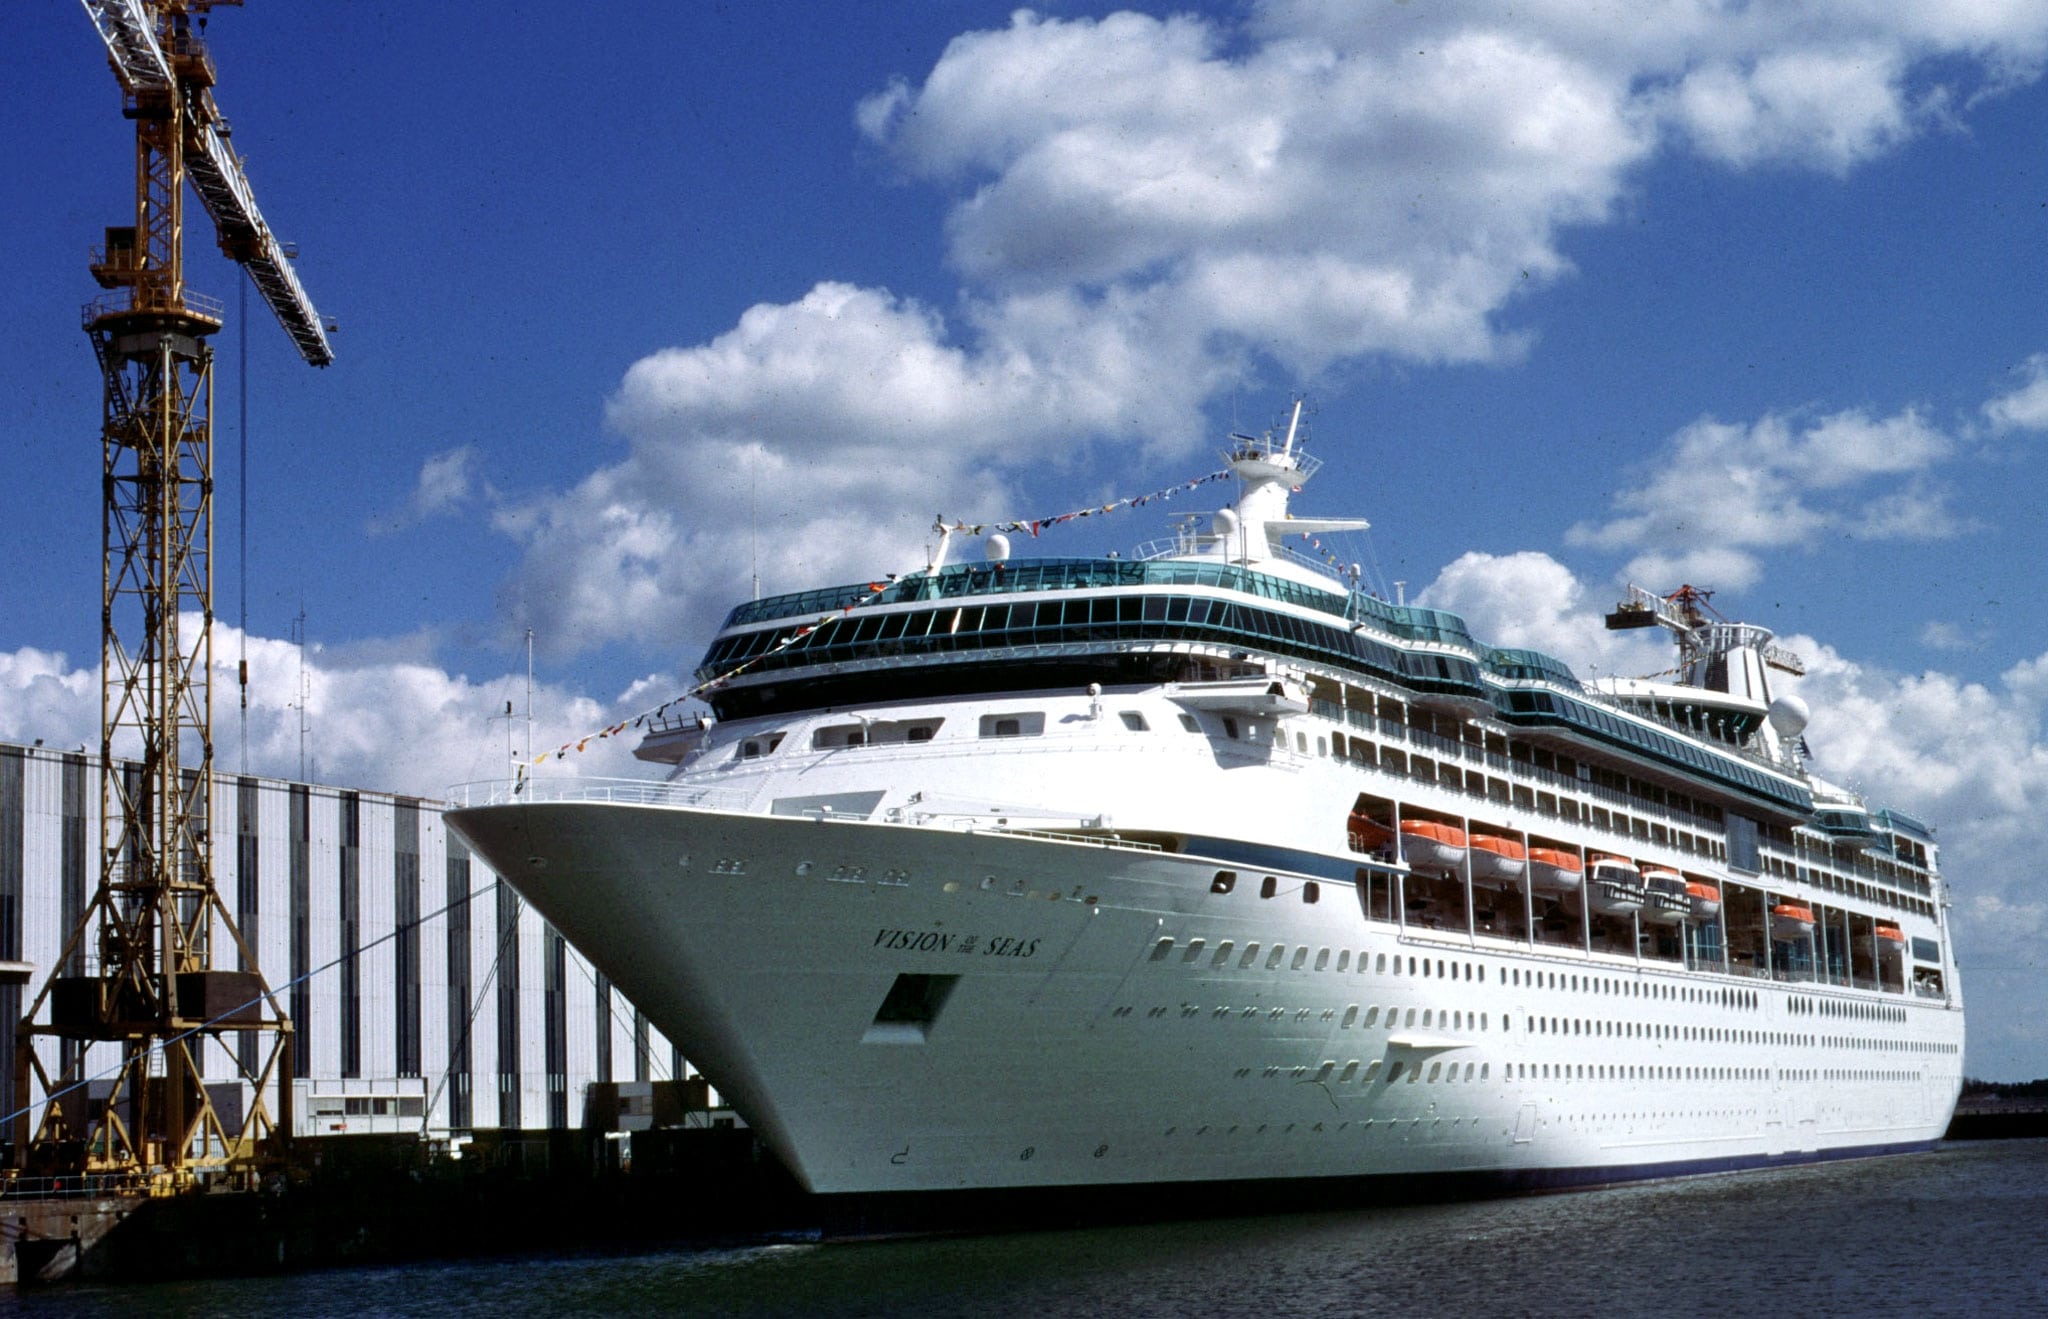 Handout photo of the ocean liner "Vision of the Seas" of The Royal Caribbean Cruise Ltd. sitting quayside in Saint Nazaire